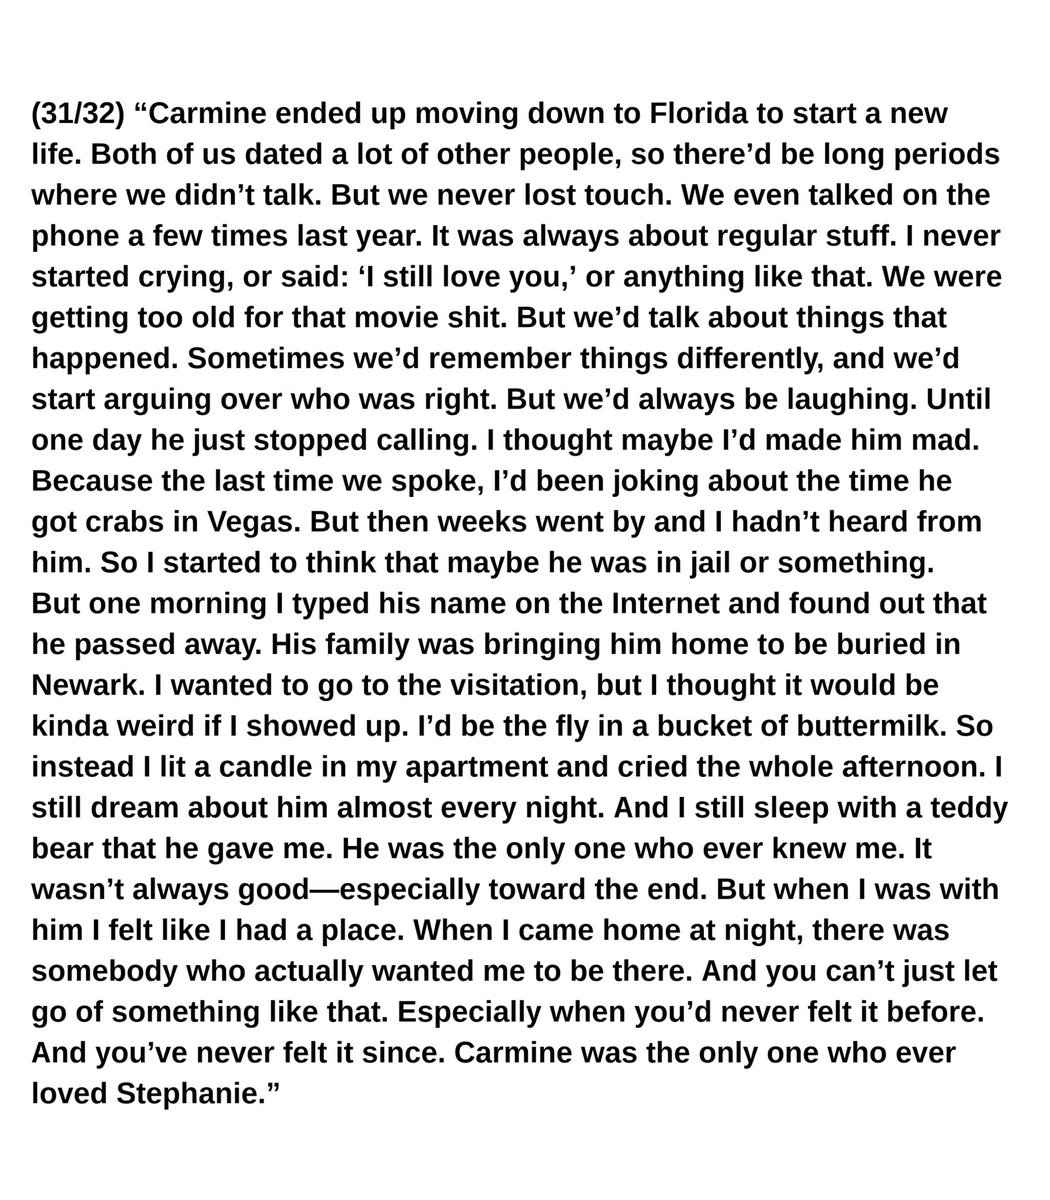 (31/32) “Carmine ended up moving down to Florida to start a new life. Both of us dated a lot of other people, so there’d be long periods where we didn’t talk. But we never lost touch. We even talked on the phone a few times last year..." #TattletalesfromTanqueray